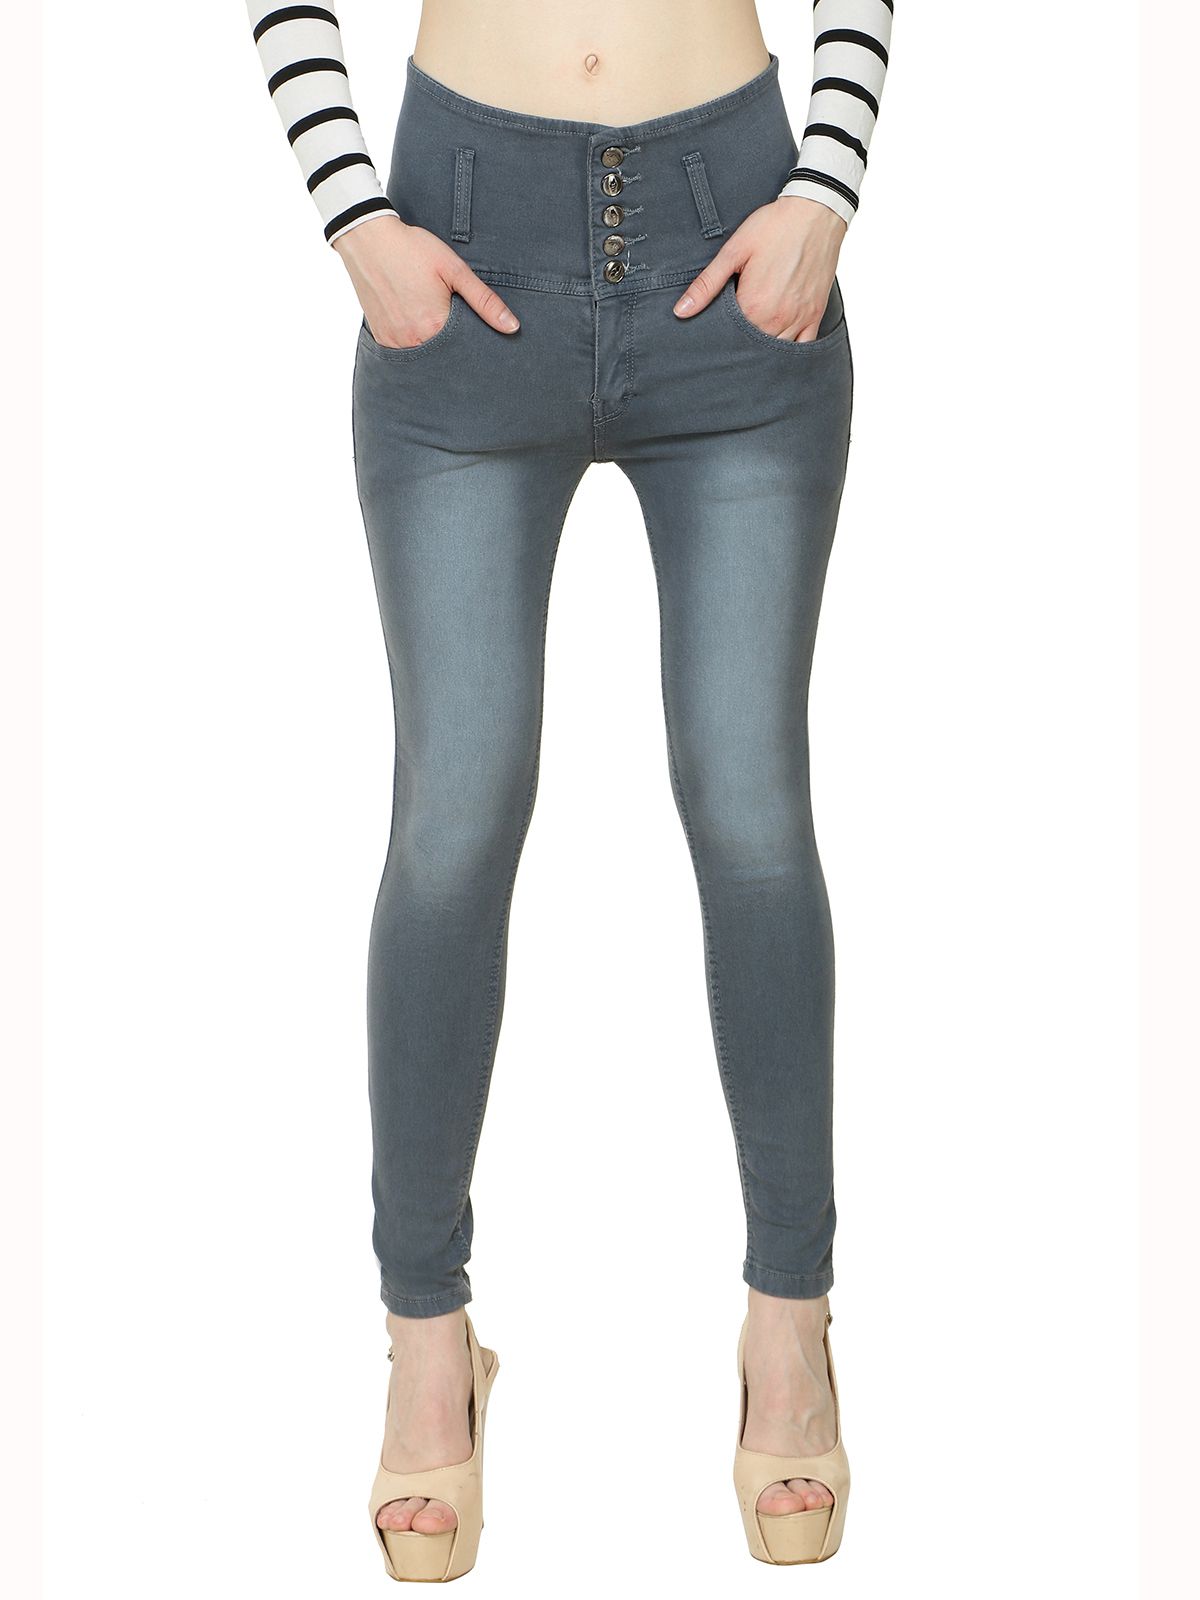 Buy KA Fashion Denim Jeans - Grey Online at Best Prices in India - Snapdeal